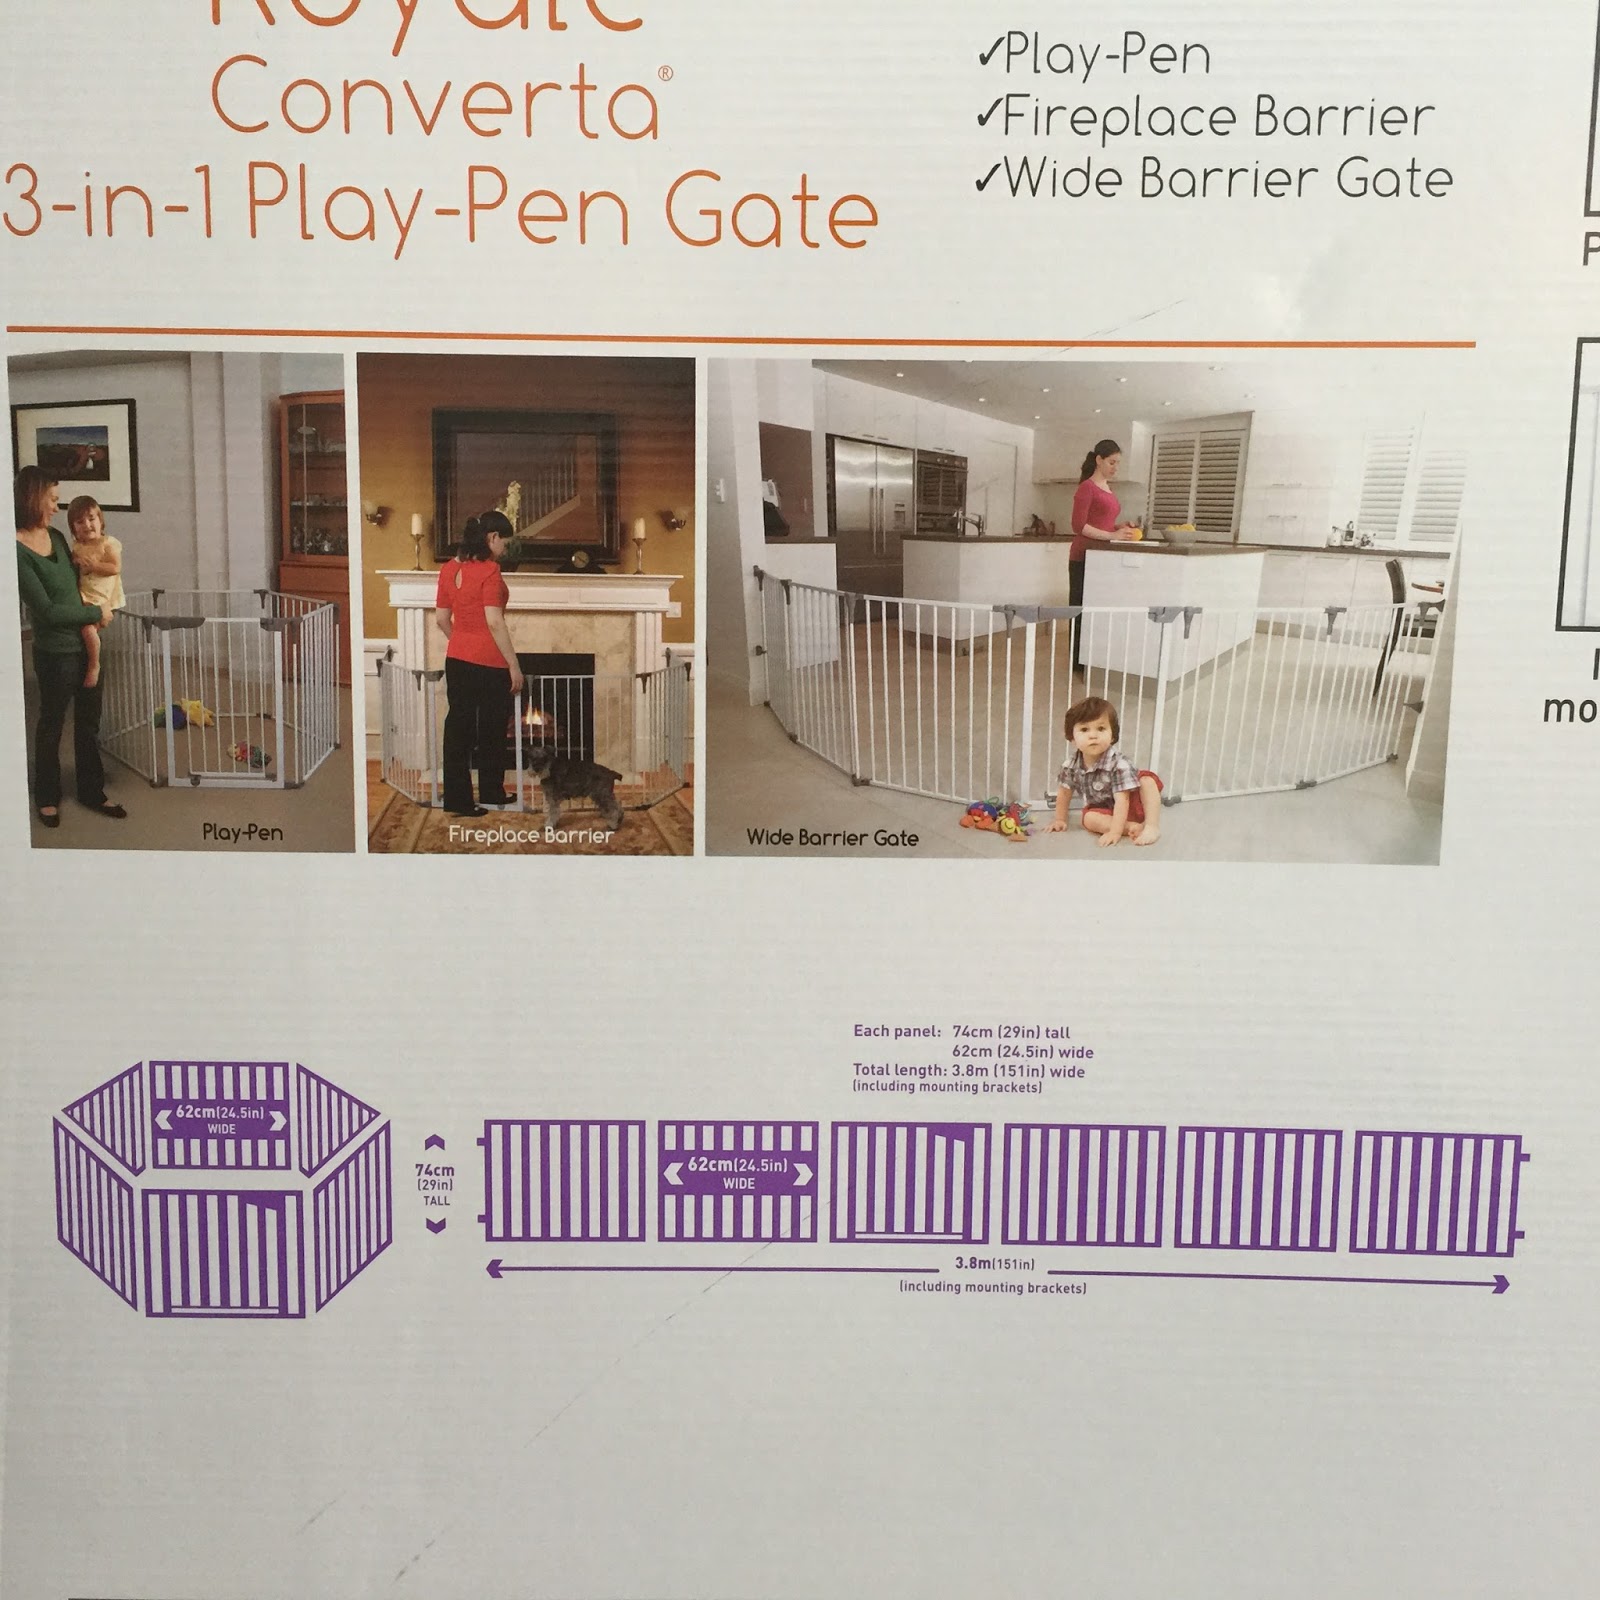 ROYALE CONVERTA 3 IN 1 PLAY-PEN GATE